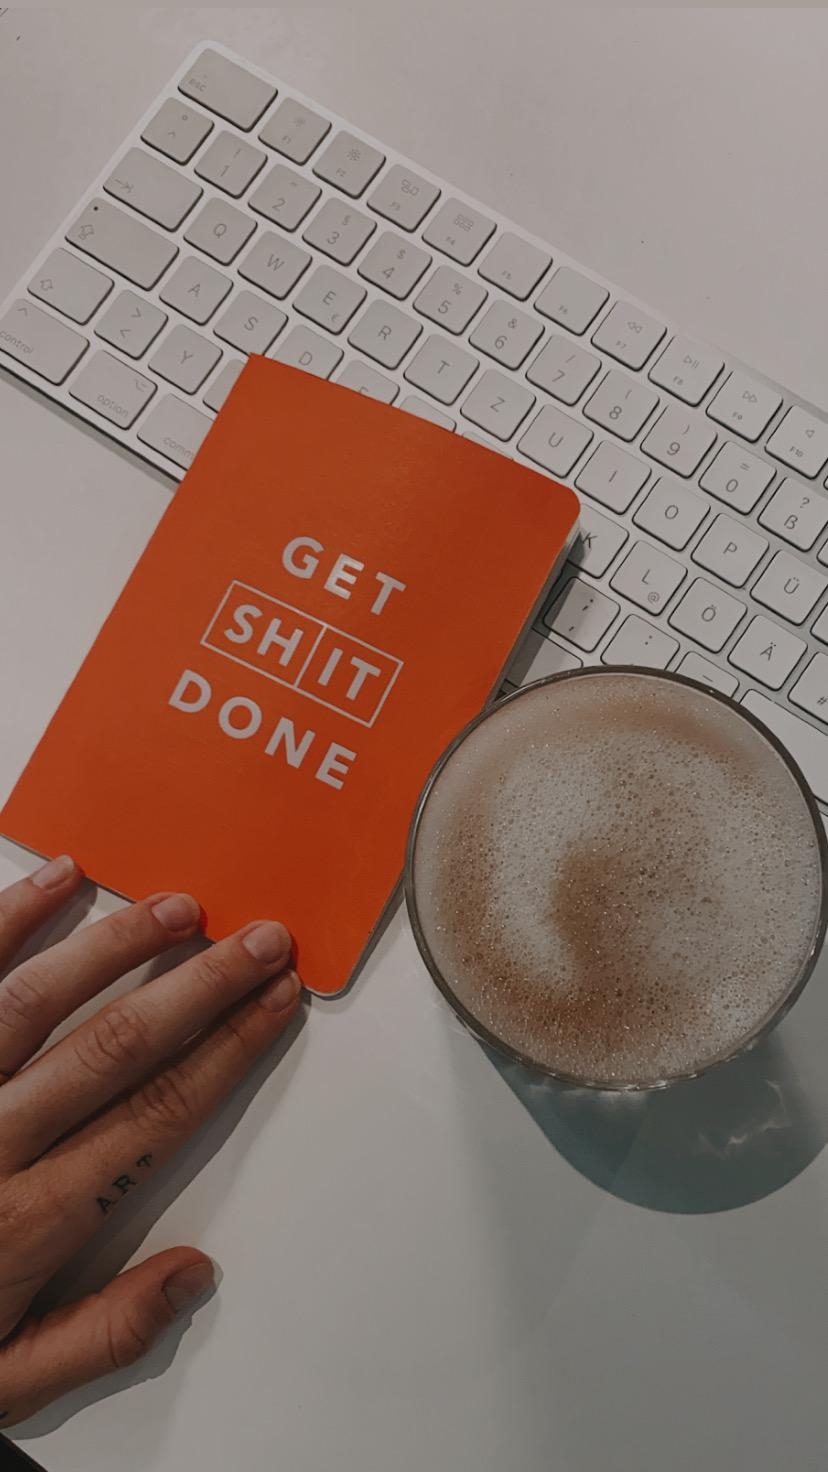 get shit done. #notizbuch #todos #office